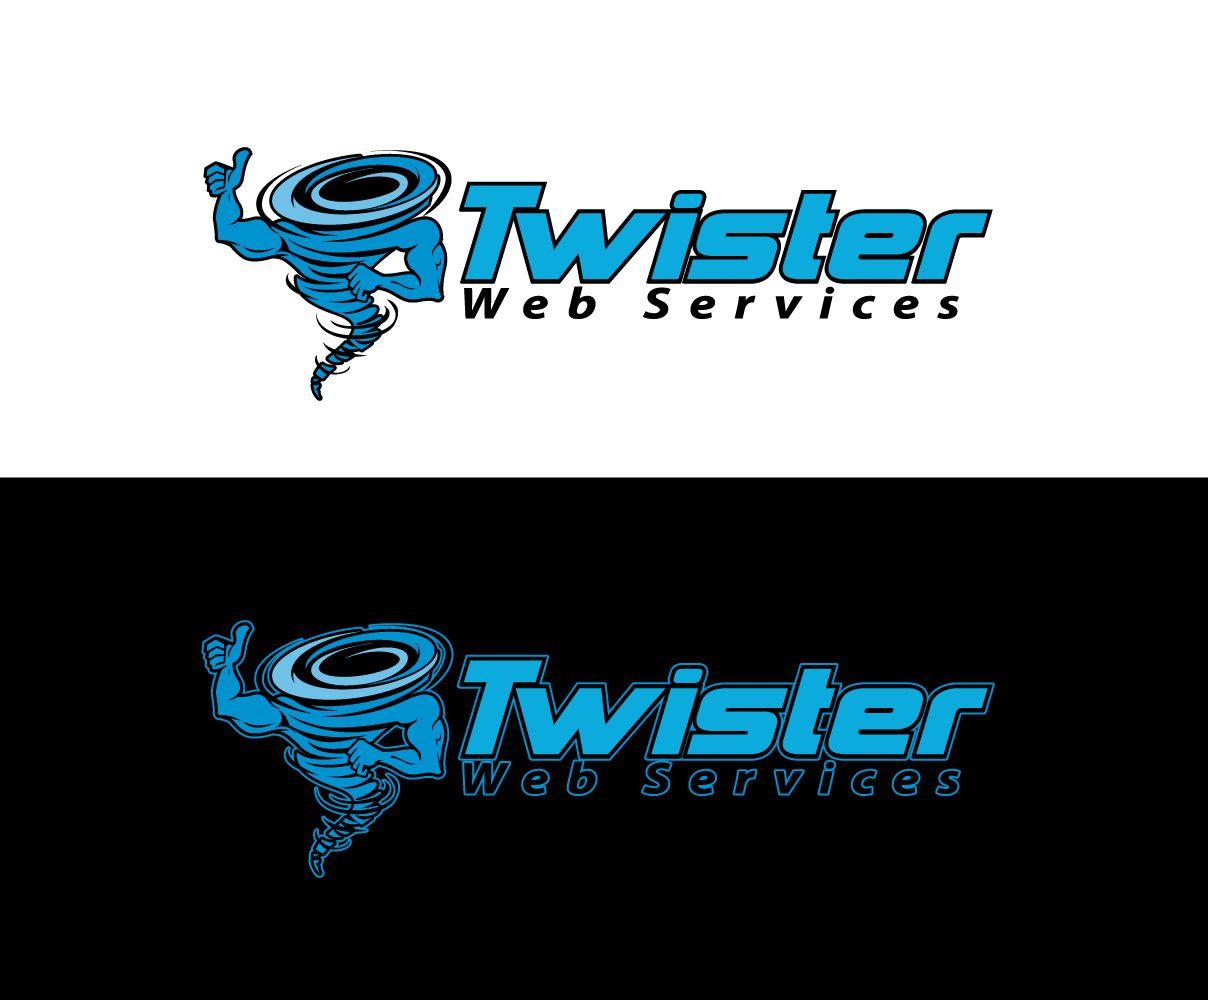 Twister Logo - Business Logo Design for Twister Web Services by Graphicsexpert ...